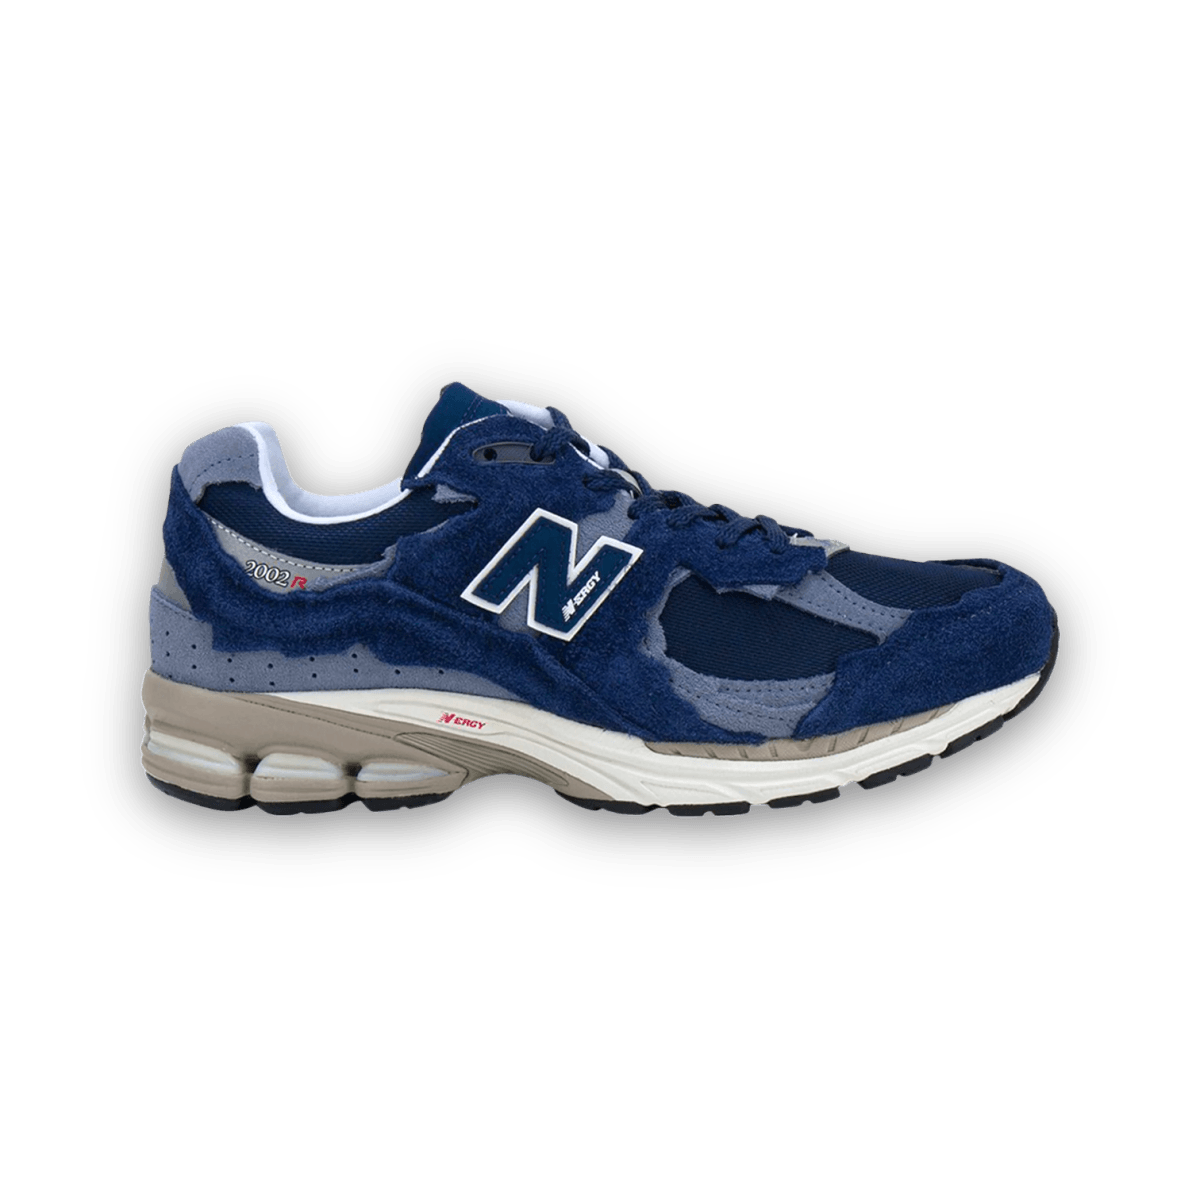 New Balance 2002R 'Protection Pack - Navy' - Low Sneaker - Jawns on Fire Sneakers & Streetwear